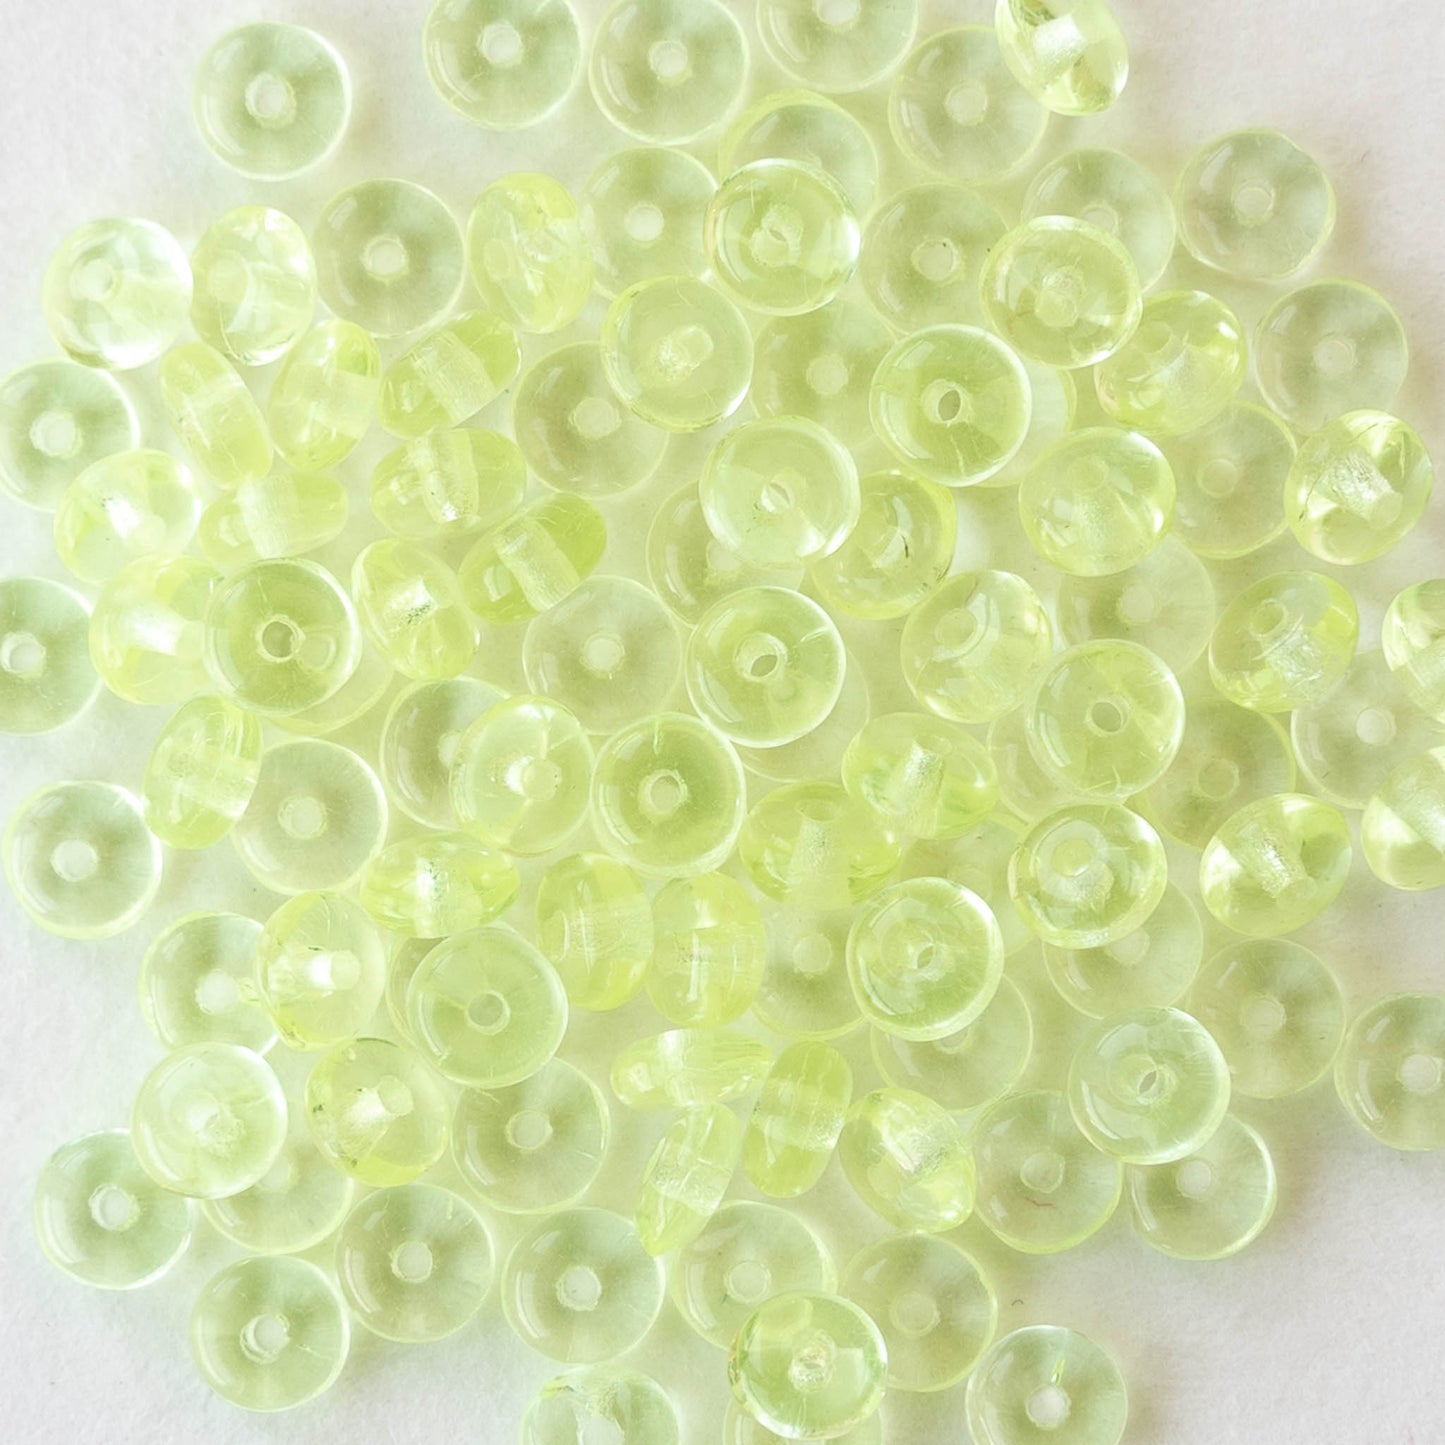 4mm Rondelle Beads - Jonquil Yellow - 100 Beads